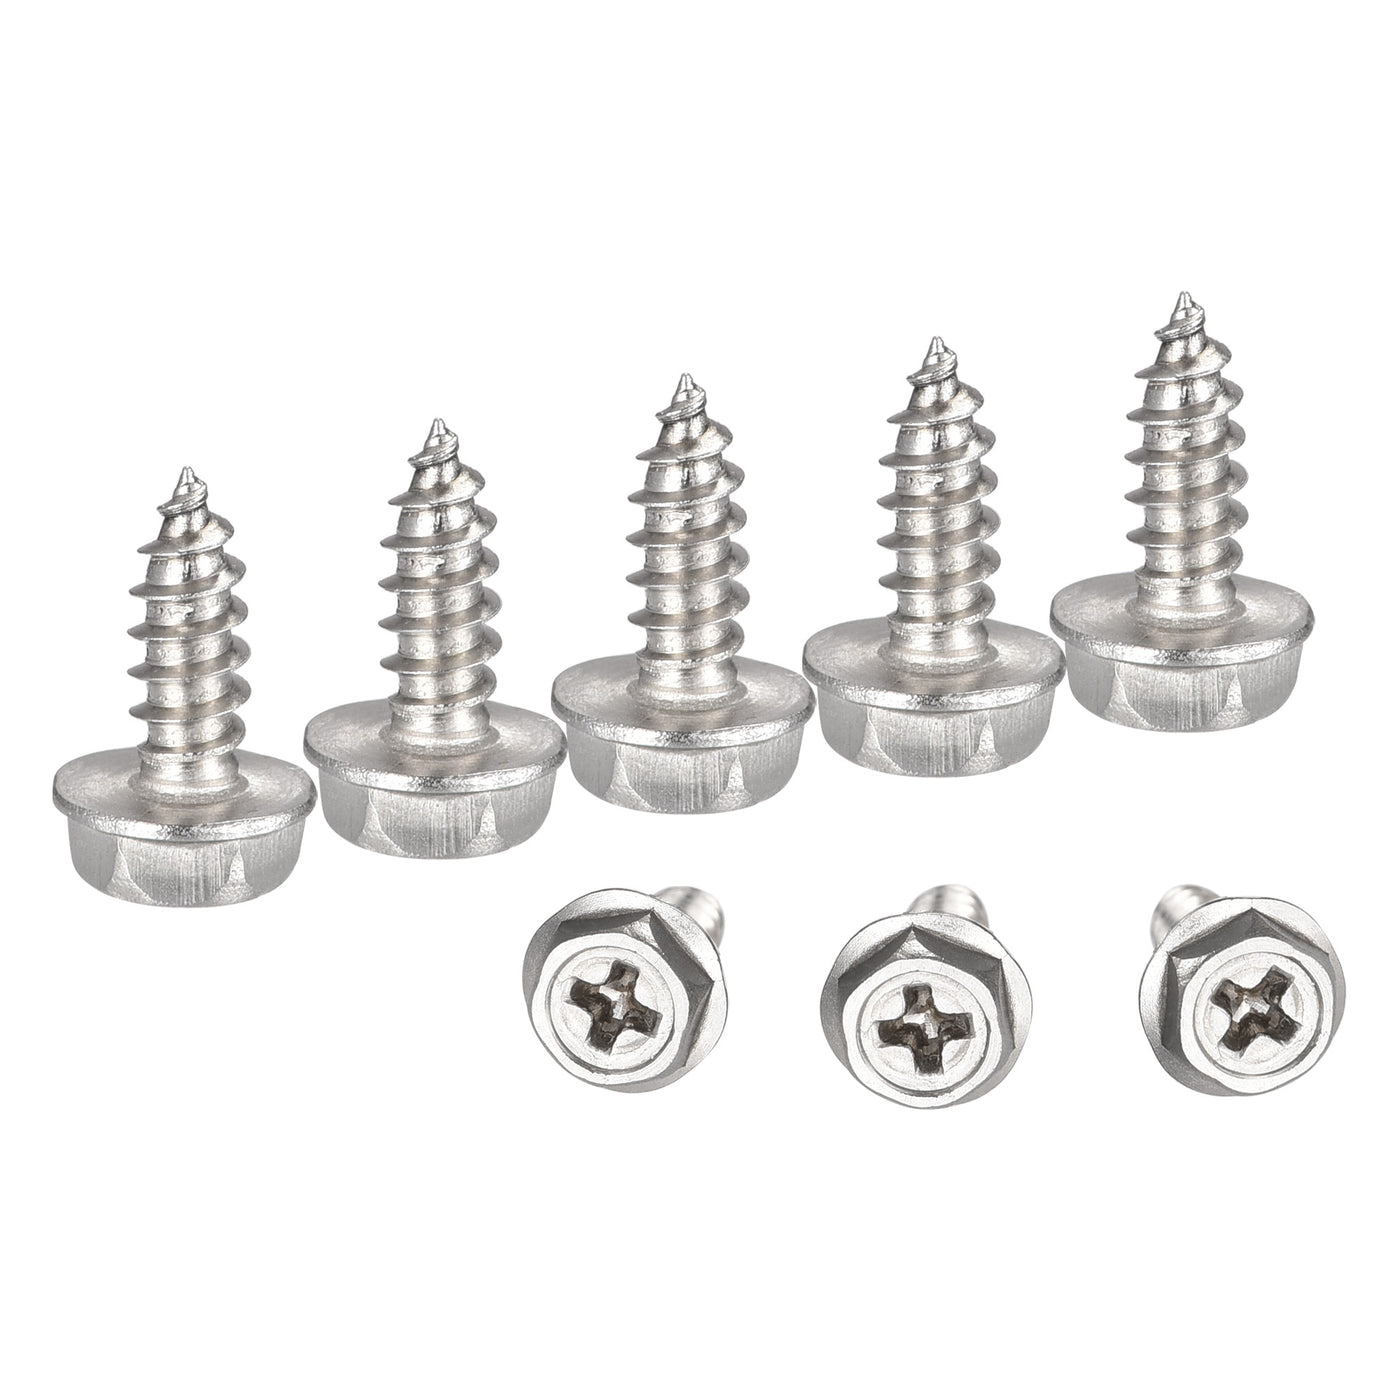 uxcell Uxcell Phillips Hex Washer Self Tapping Screws, M4 x 12mm 304 Stainless Steel Hex Flange Sheet Metal Screw 100pcs